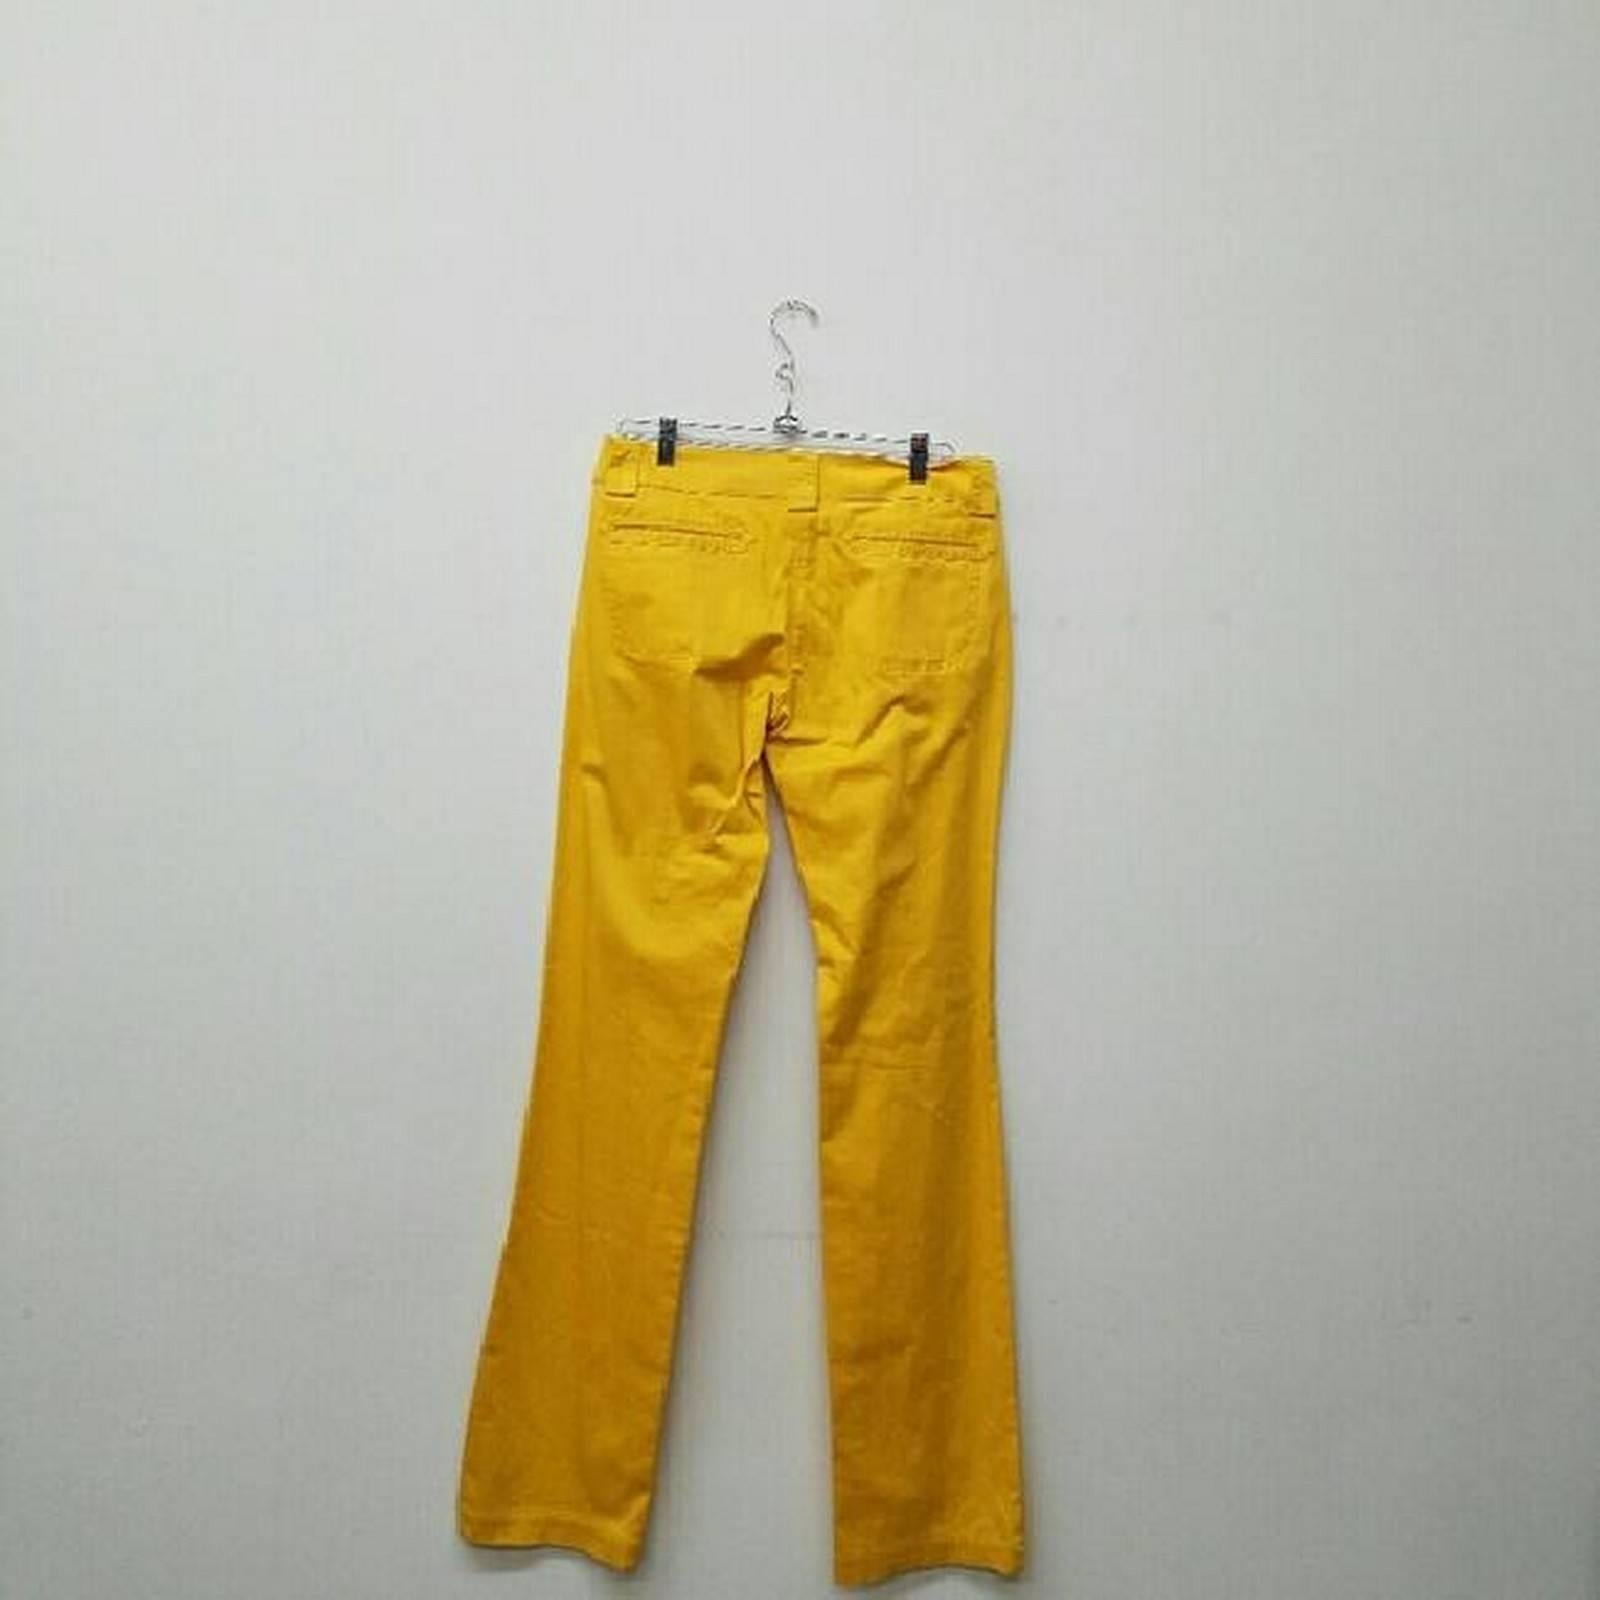 Roberto Cavalli Casual Trousers Pants

Wide Leg. Brand new. Never used. No tags.

Type:Pants
Size:12 (L, 32, 33)
Color:yellow
Brand:Roberto Cavalli
Style/Collection:Roberto Cavalli Casual Trousers